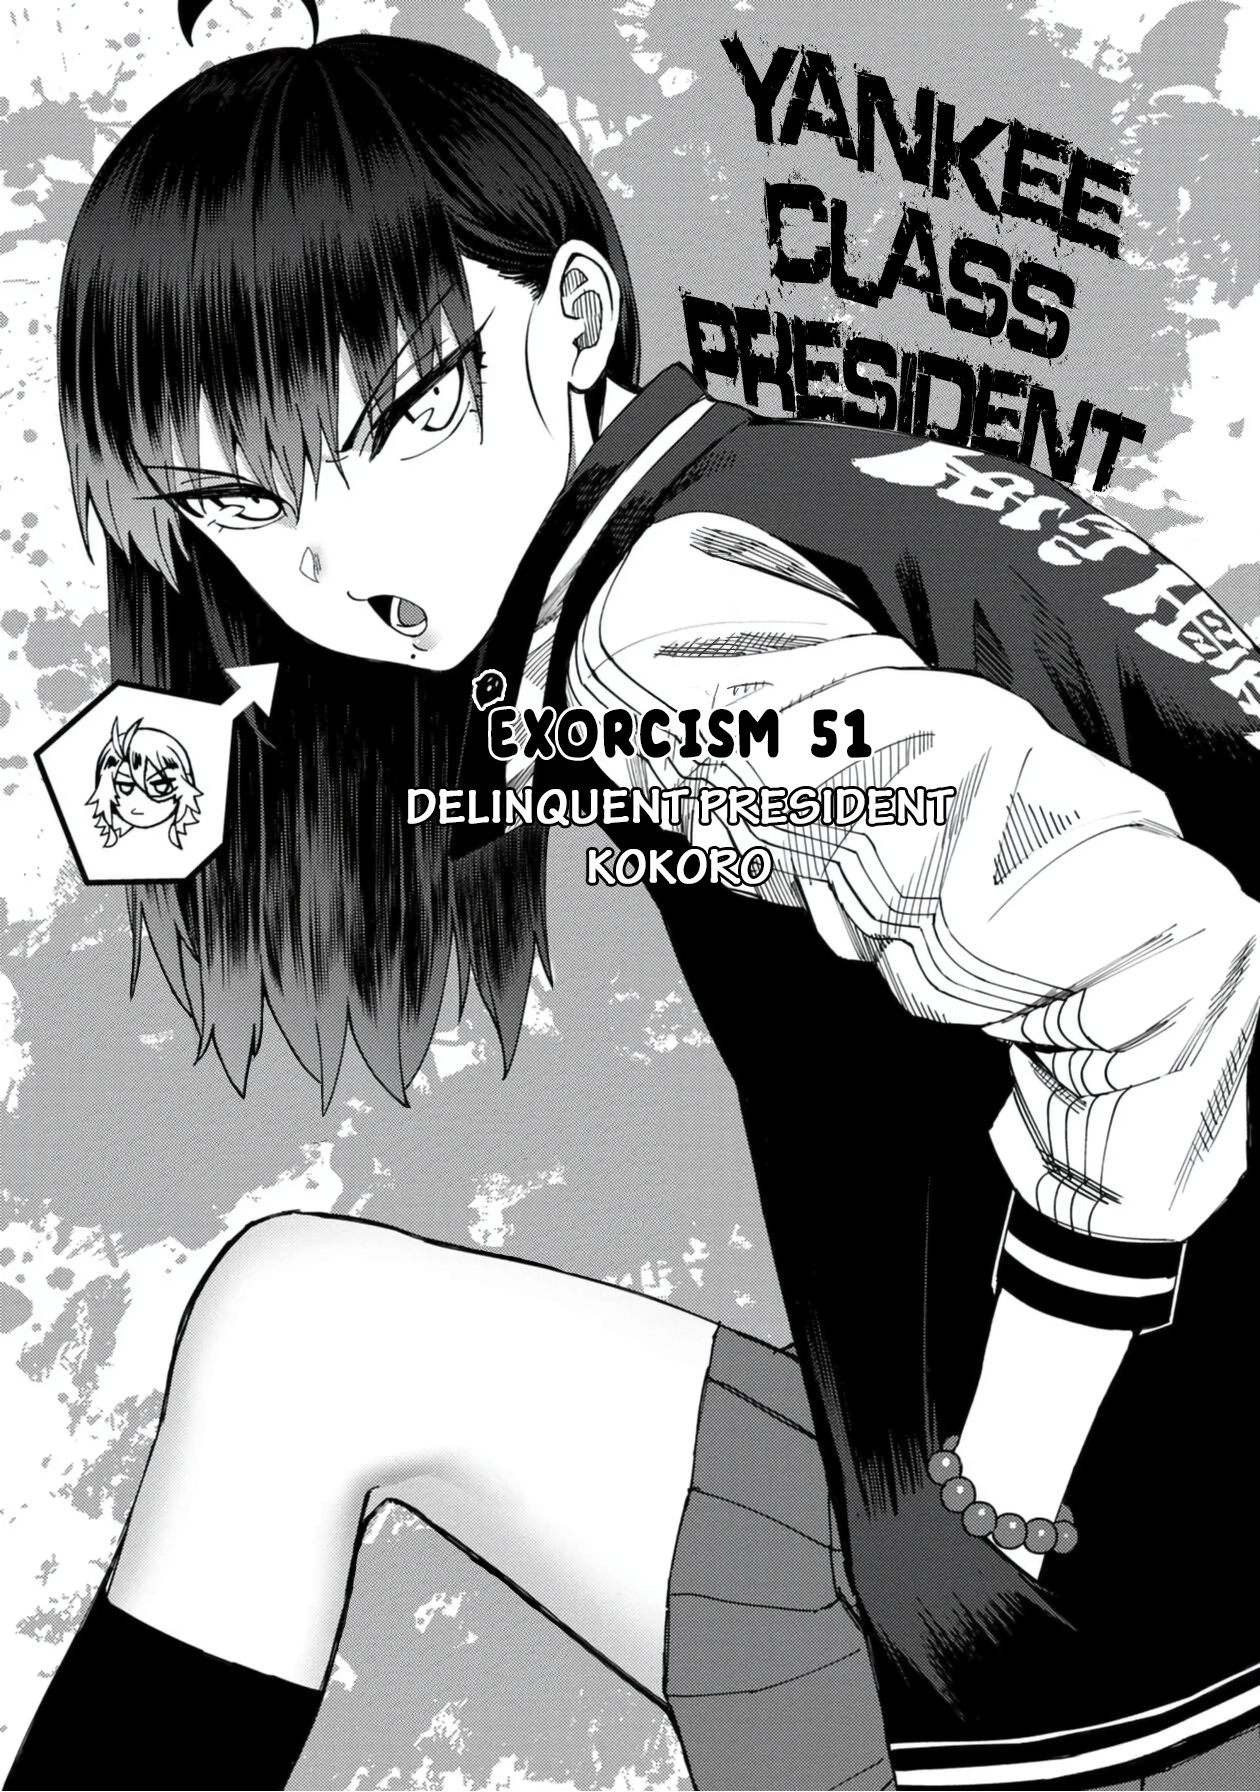 Bad Girl-Exorcist Reina Vol.5 Chapter 51: Exorcism #51 - Delinquent President Kokoro - Picture 1